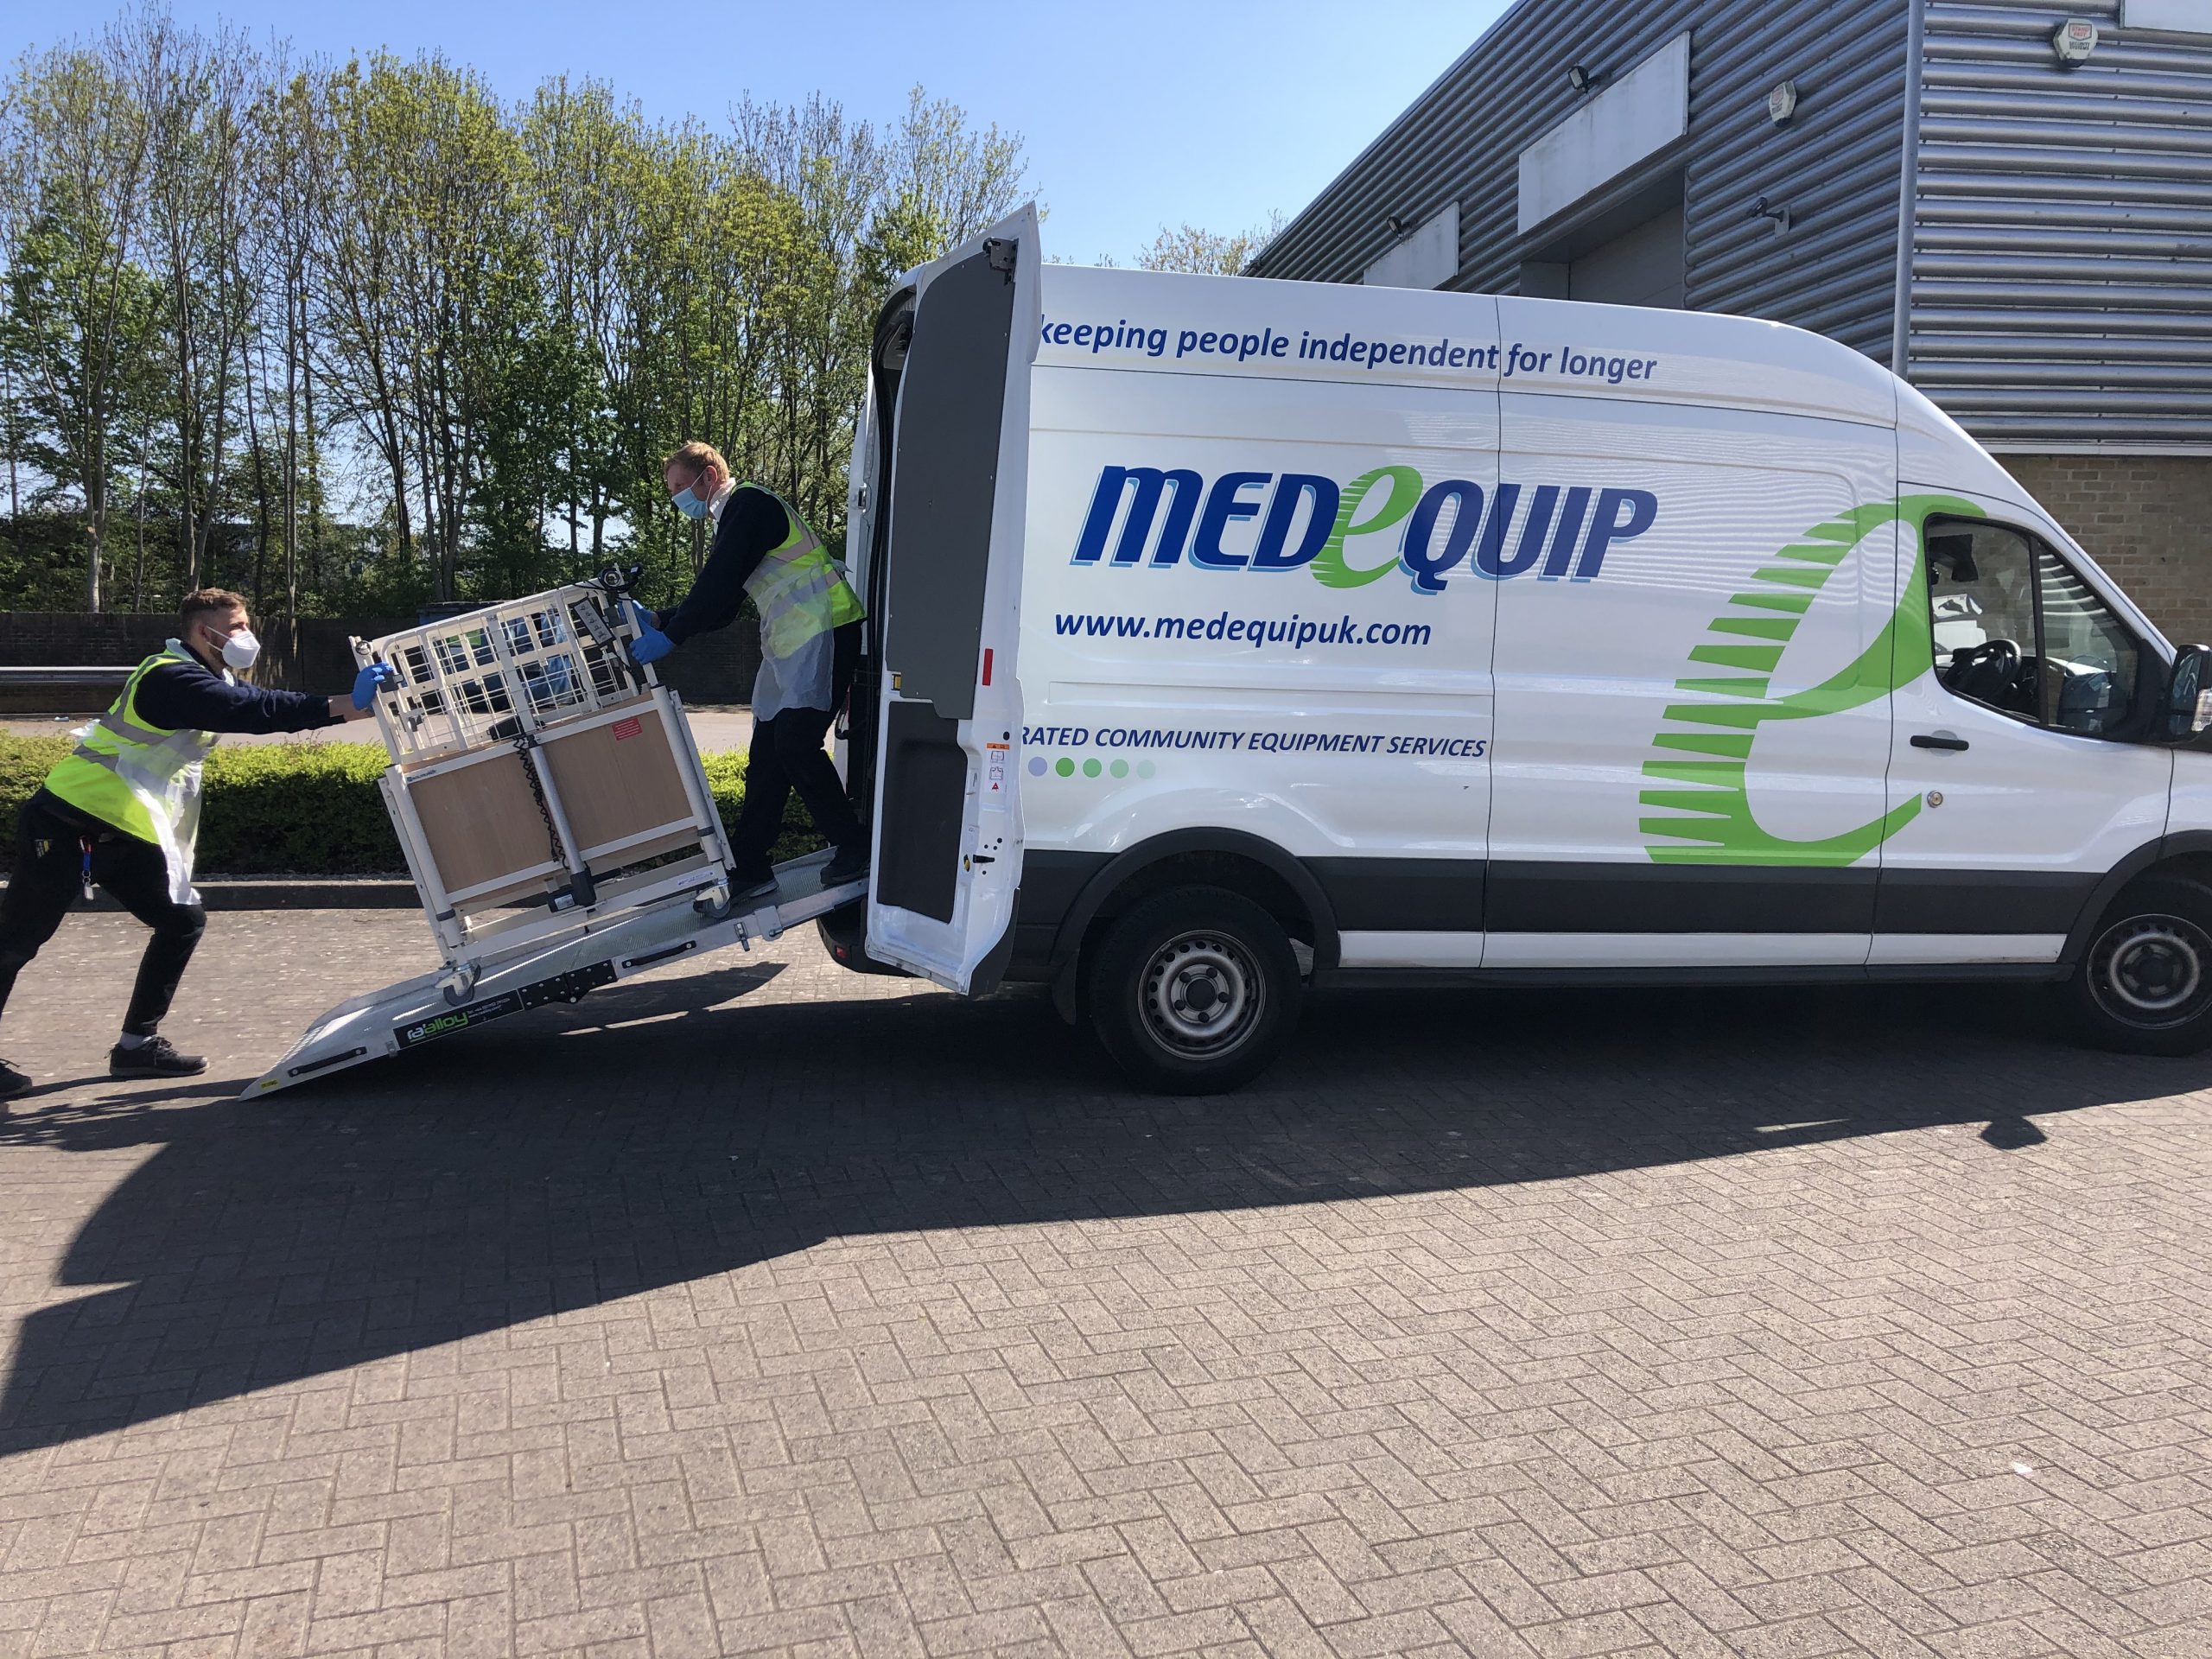 Medway Council Selects Medequip for Community Equipment Services